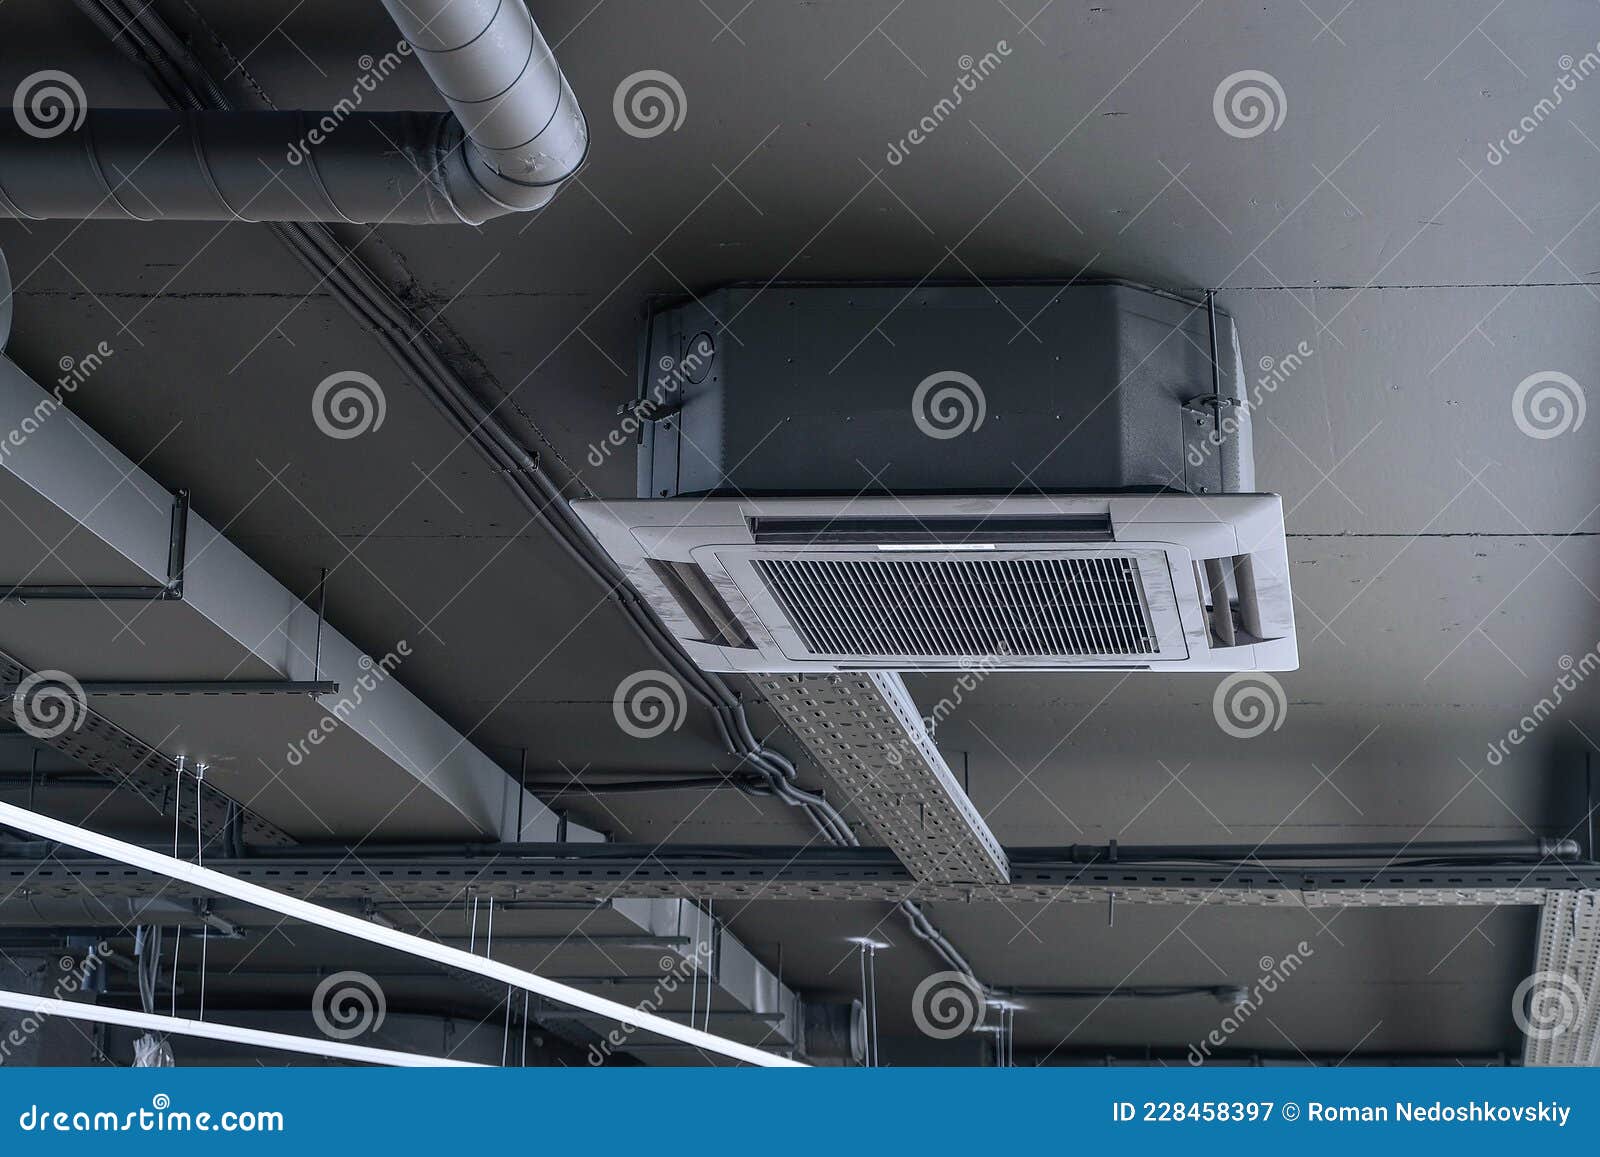 Cassette Split System on Gray Ceiling with Ventilation Ducts Stock